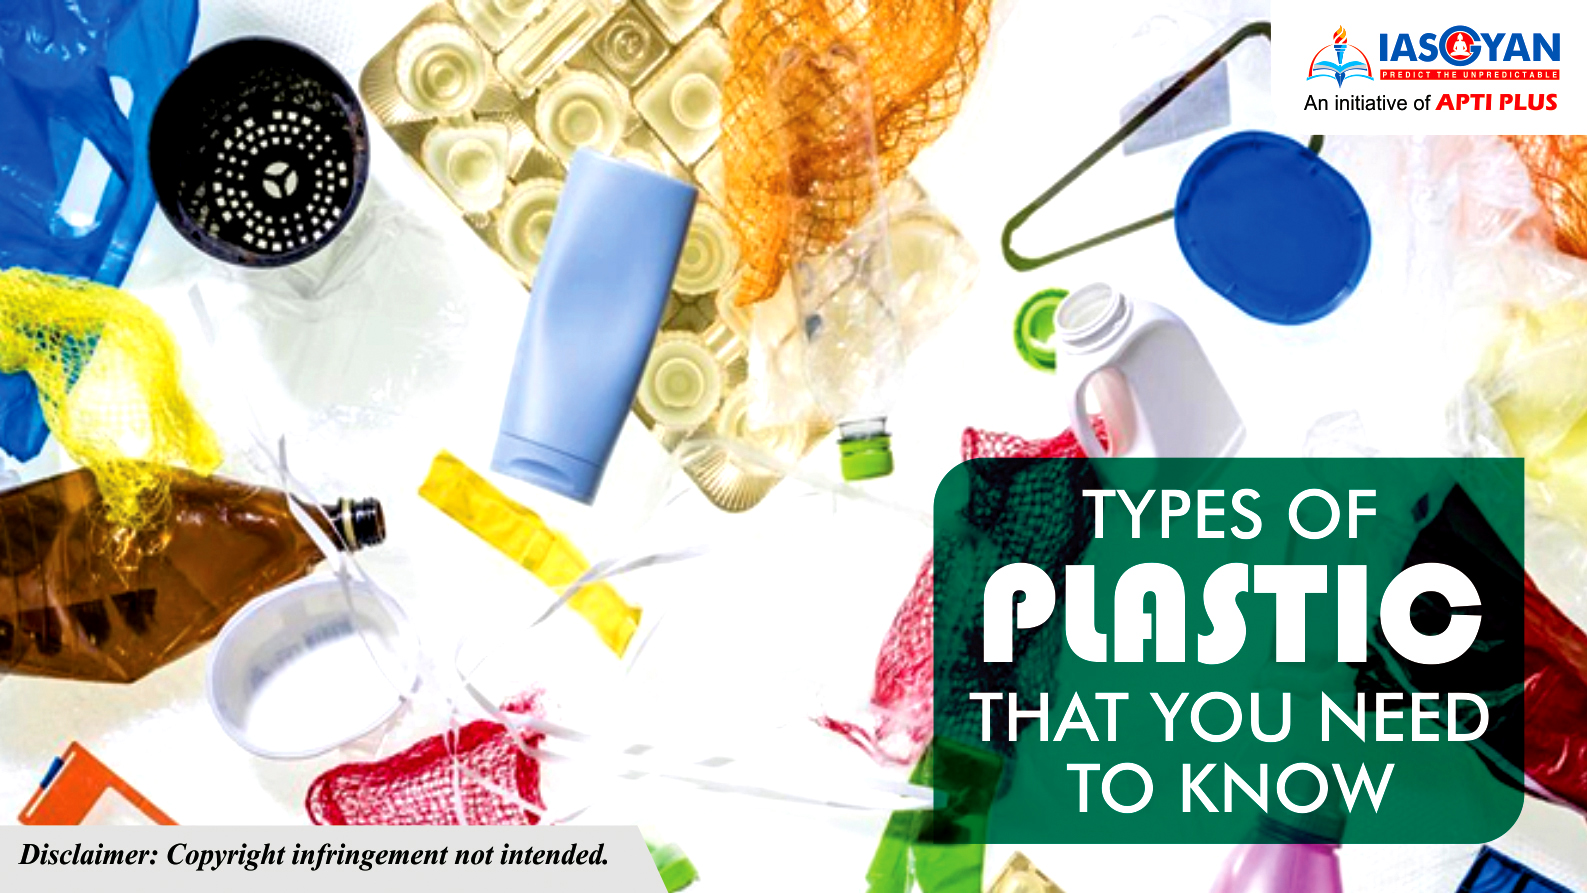 TYPES OF PLASTIC THAT YOU NEED TO KNOW